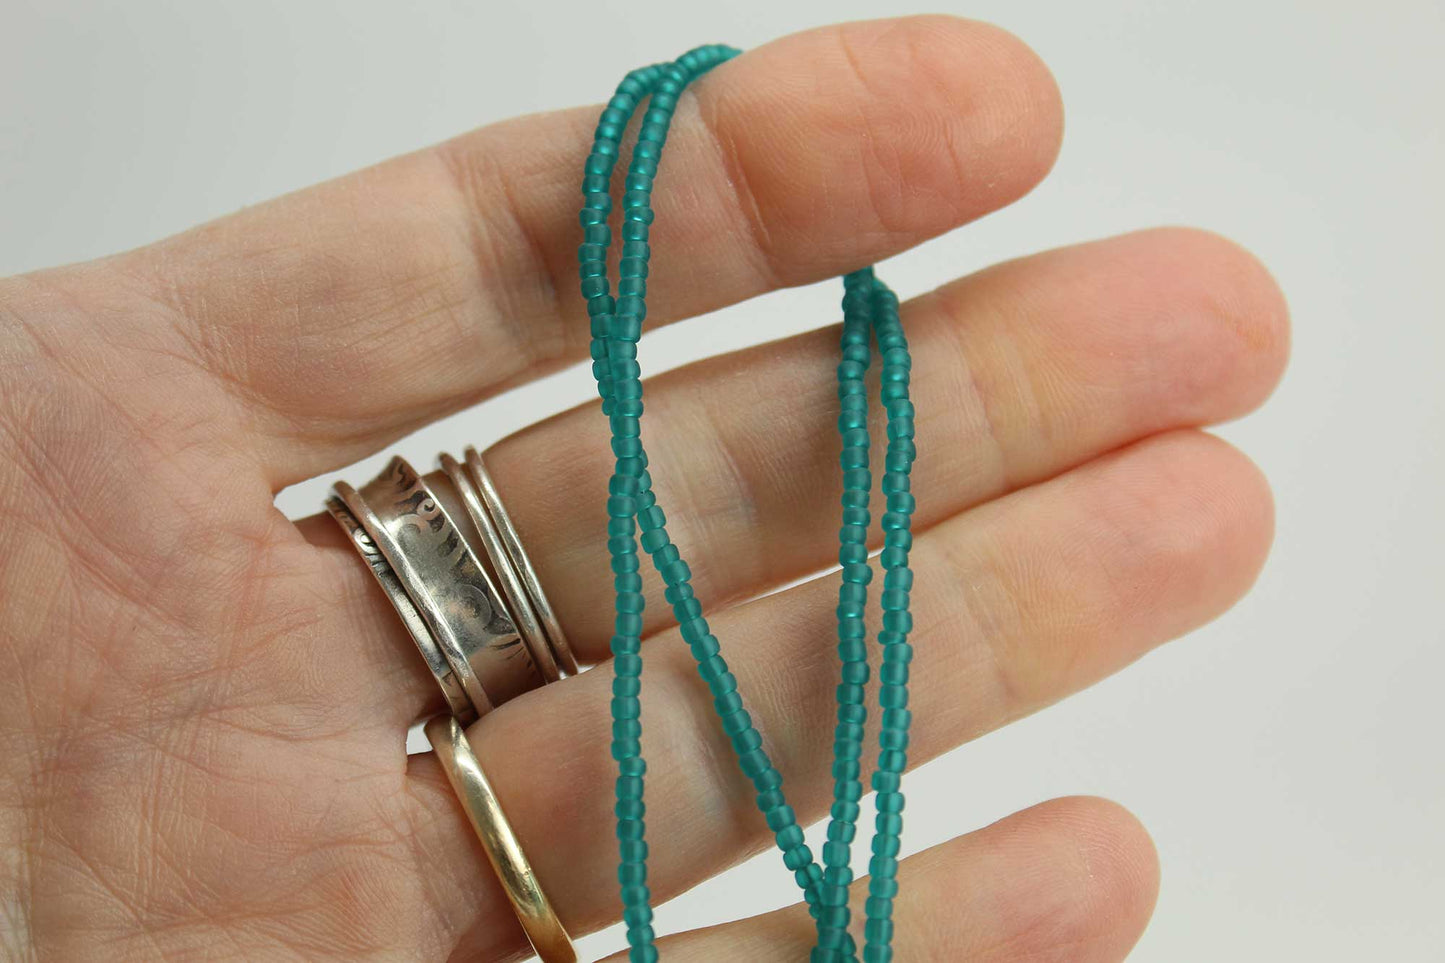 Transparent Teal Matte Seed Bead Necklace